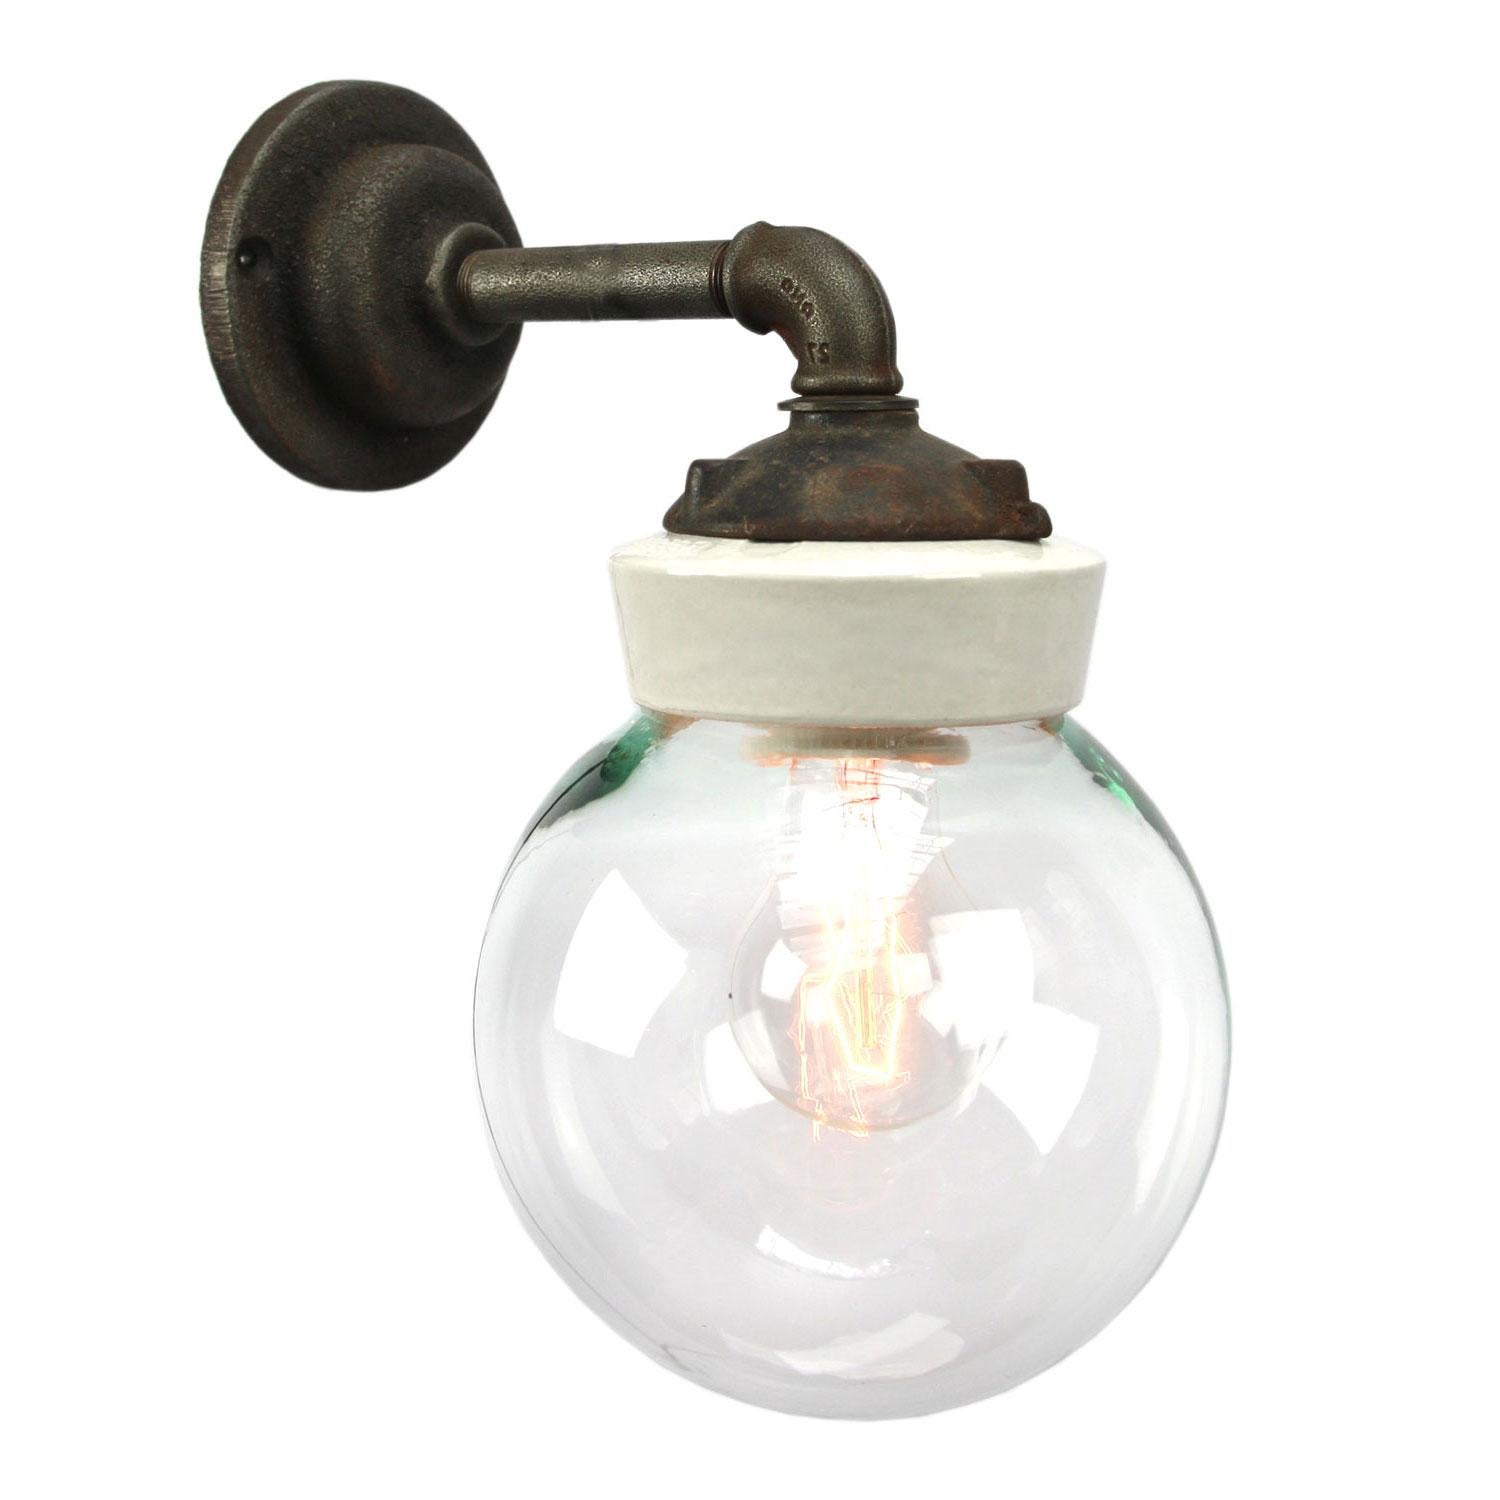 Porcelain Industrial wall lamp.
White porcelain, cast iron and clear glass.
2 conductors, no ground.

For use inside only

Measues: Weight: 2.05 kg / 4.5 lb

Priced per individual item. All lamps have been made suitable by international standards